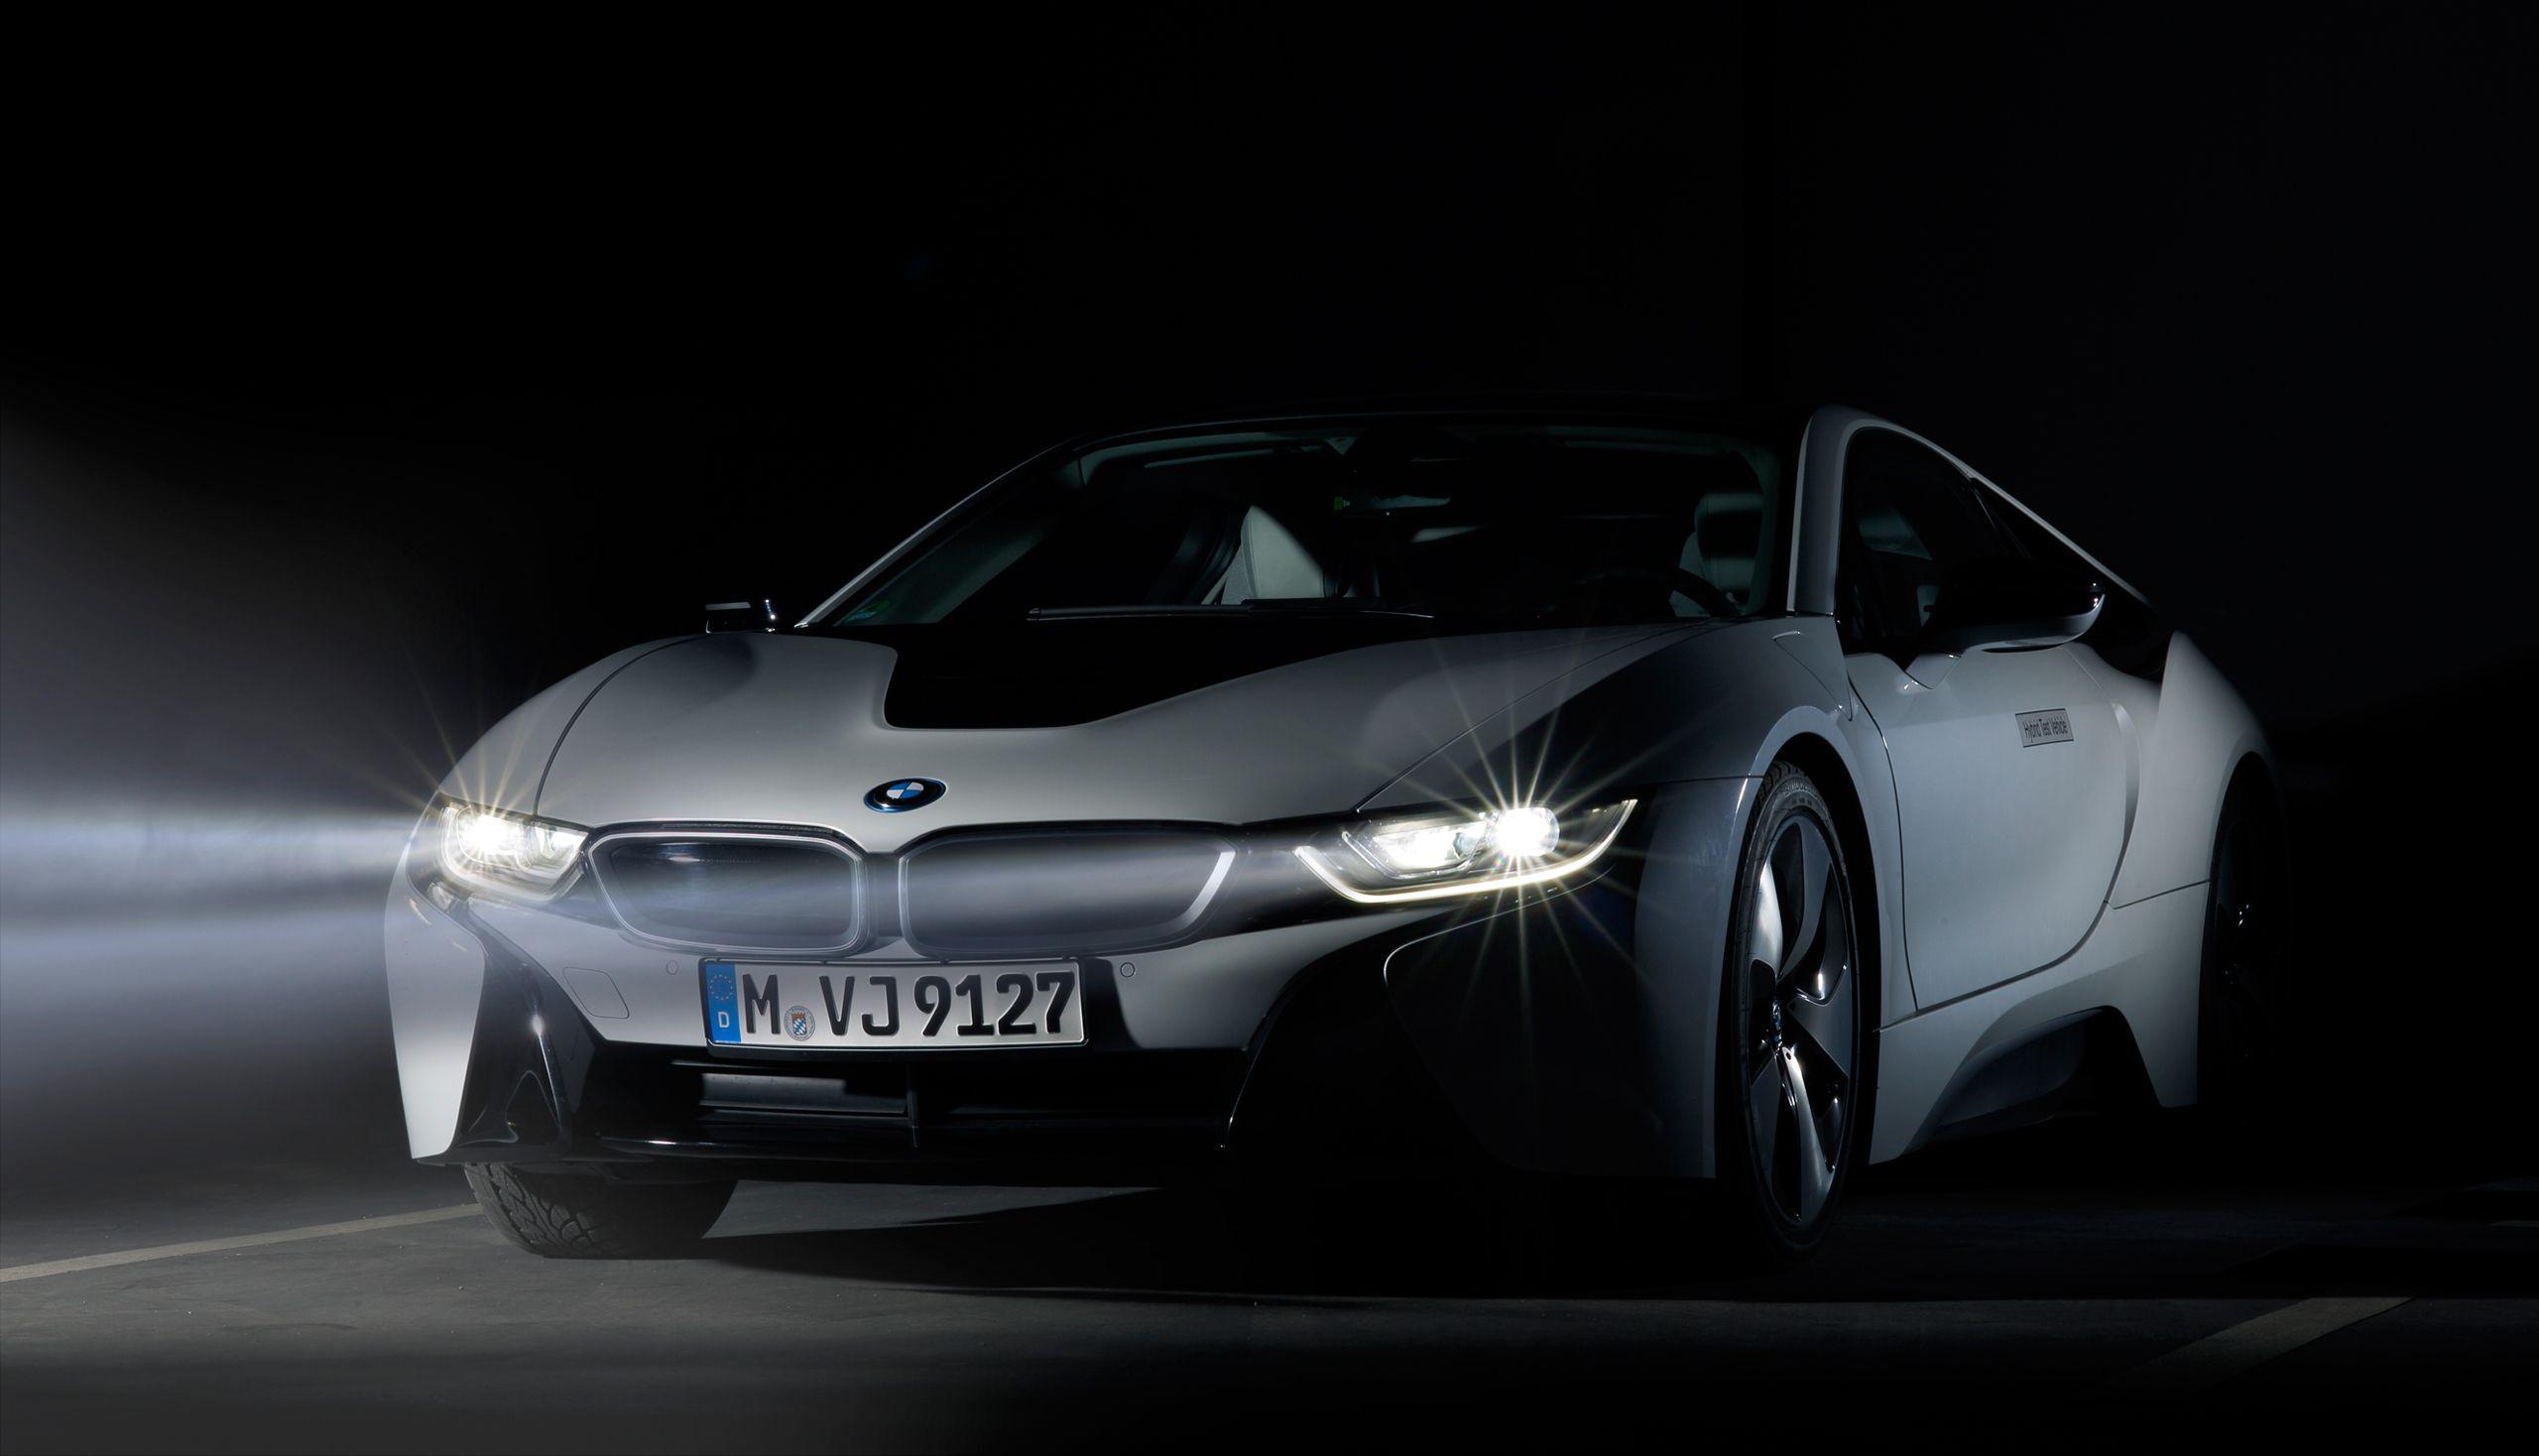 Download Bmw I8 wallpapers for mobile phone free Bmw I8 HD pictures